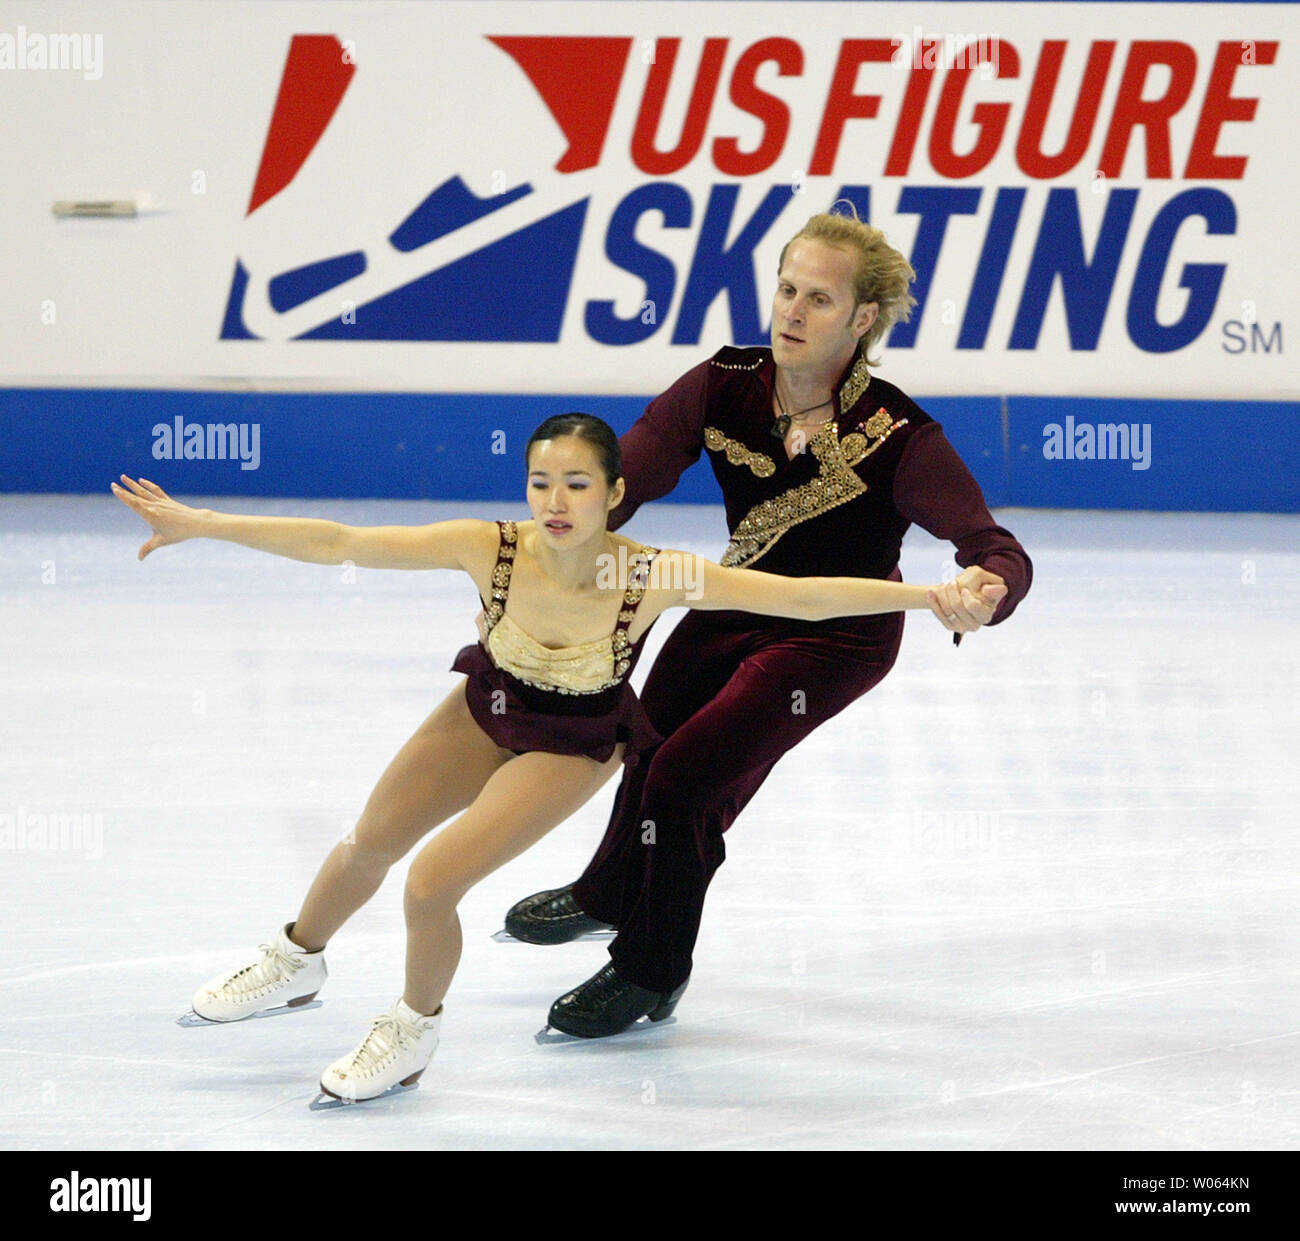 Senior dance skaters Rena Inoque of Hyougo, Japan and her partner John Baldwin of Dallas, perform their routine during the U.S. Figure Skating qualifying event at the Savvis Center in St. Louis on January 13, 2006. (UPI Photo/Bill Greenblatt) Stock Photo